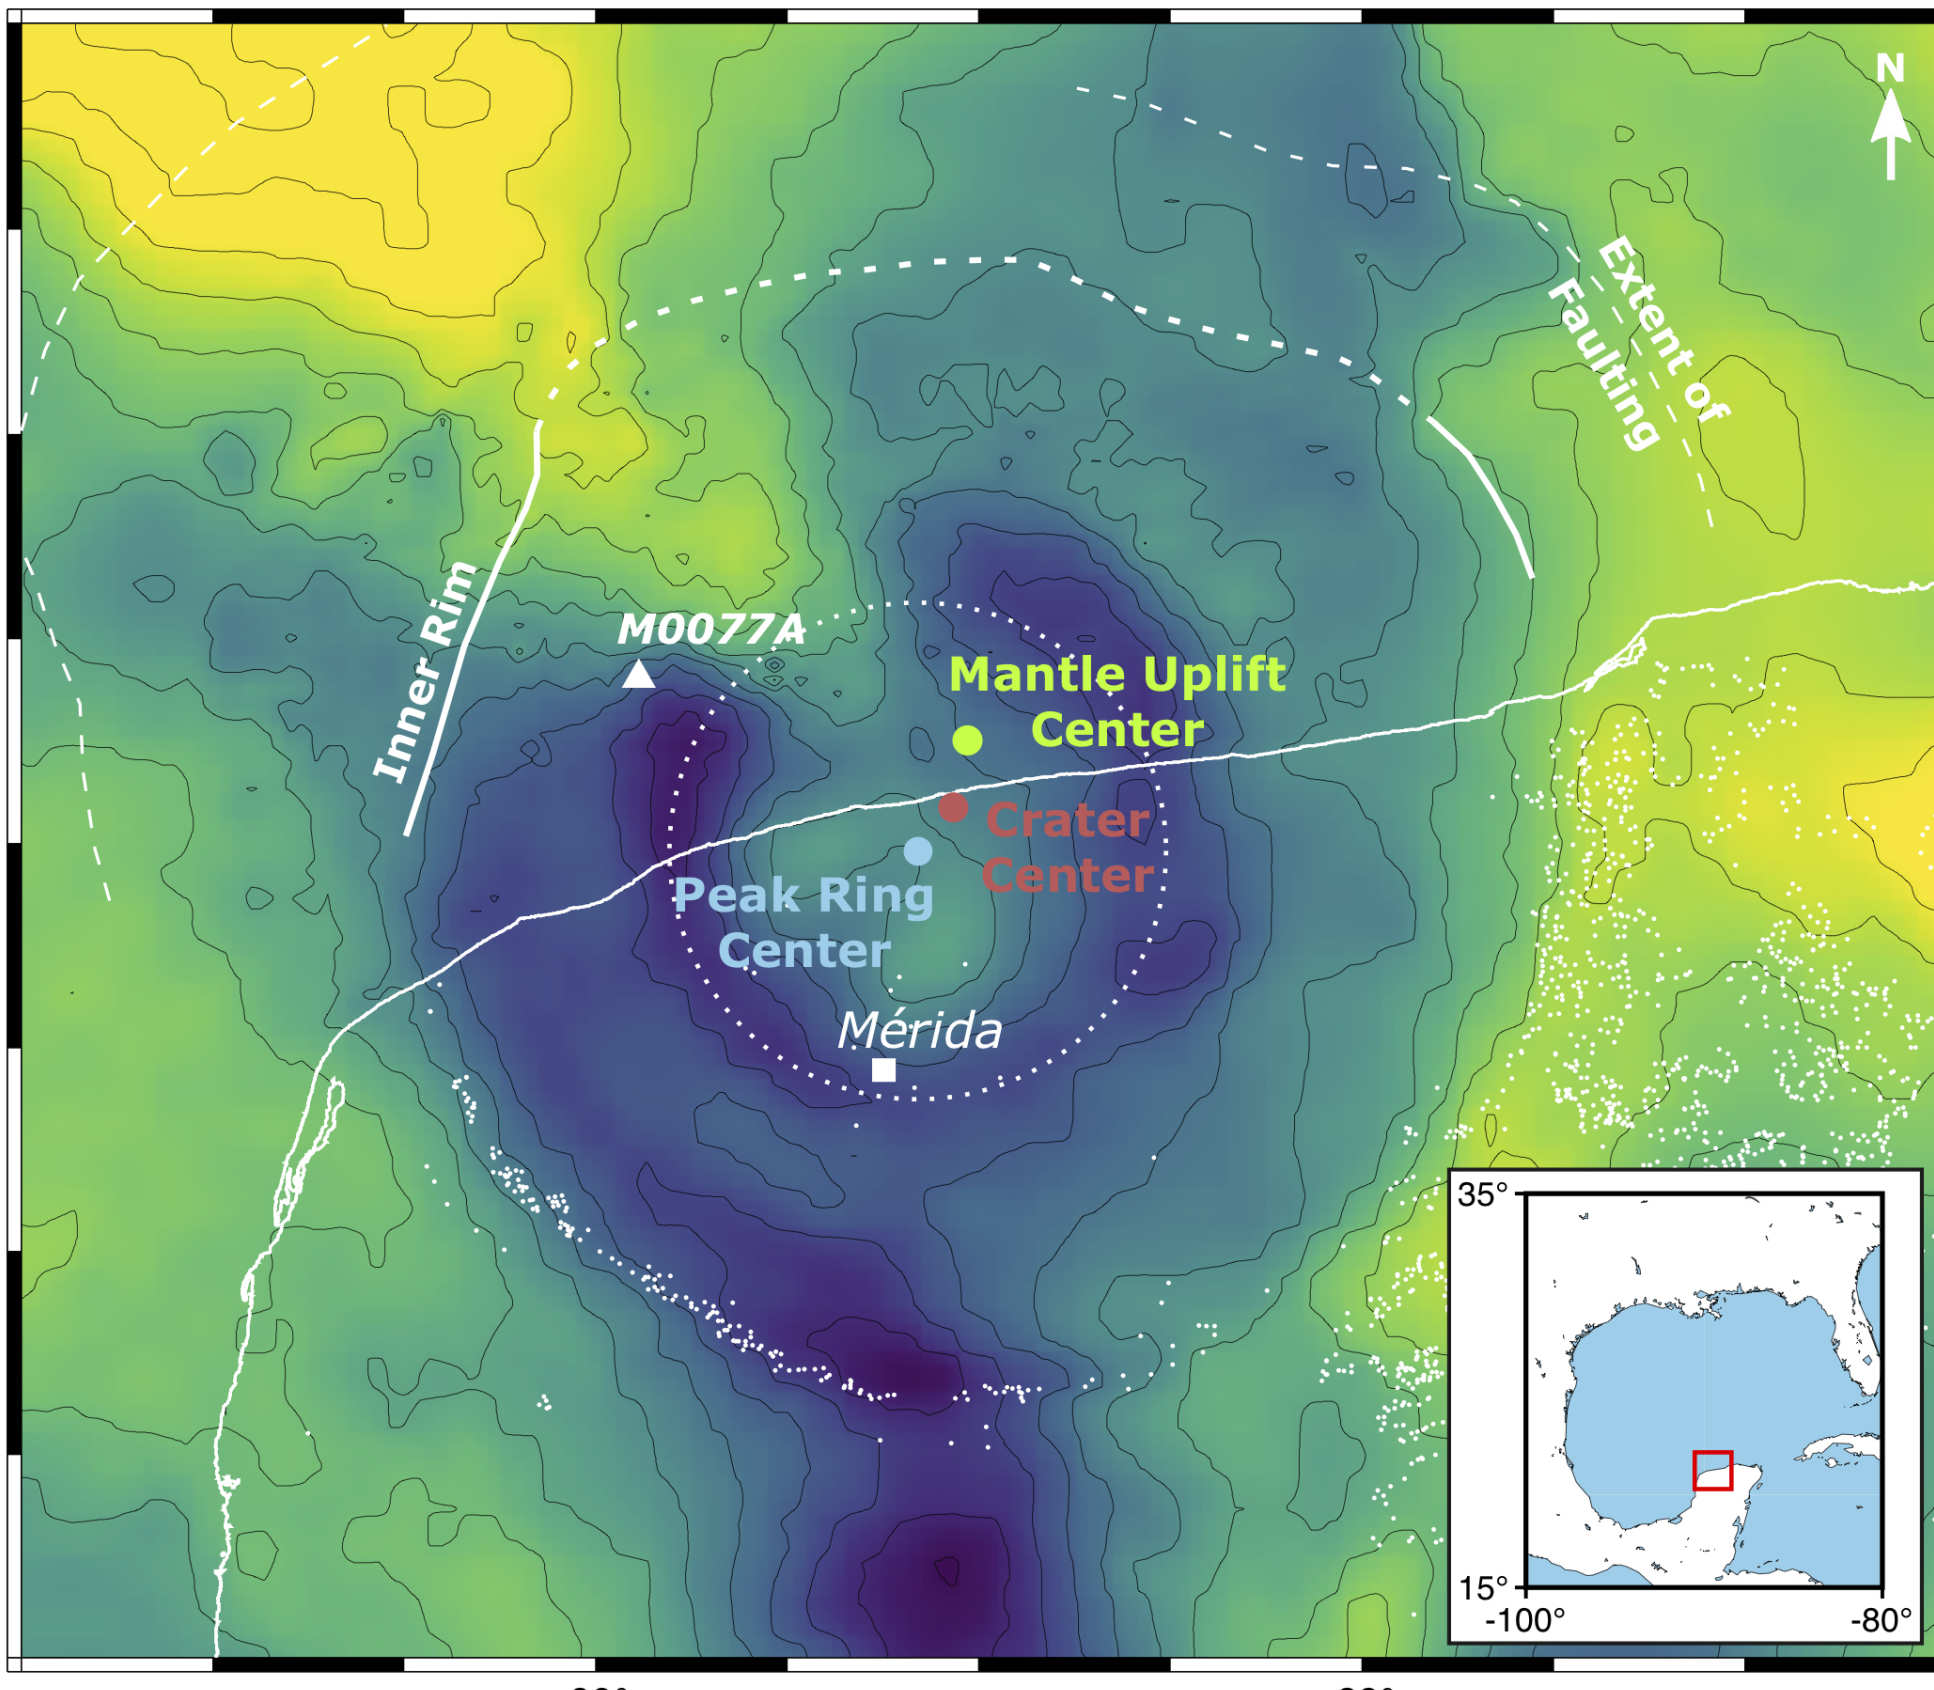 Gravity map showing asymmetries of the Chicxulub crater, Mexico. The red circle marks the crater centre; the green circle marks the centre of maximum mantle uplift; the blue circle marks the centre of the peak ring; the white triangle marks the location of the Expedition 364 drill site through the peak ring. The coastline is displayed with a thin white line; cenotes and sinkholes with white dots, and the city of Mérida with a white square. The dotted lines offshore mark the approximate location of the inner crater rim and the extent of faulting as imaged by seismic data. Inset depicts the regional setting, with red rectangle outlining the region shown in the gravity map. 